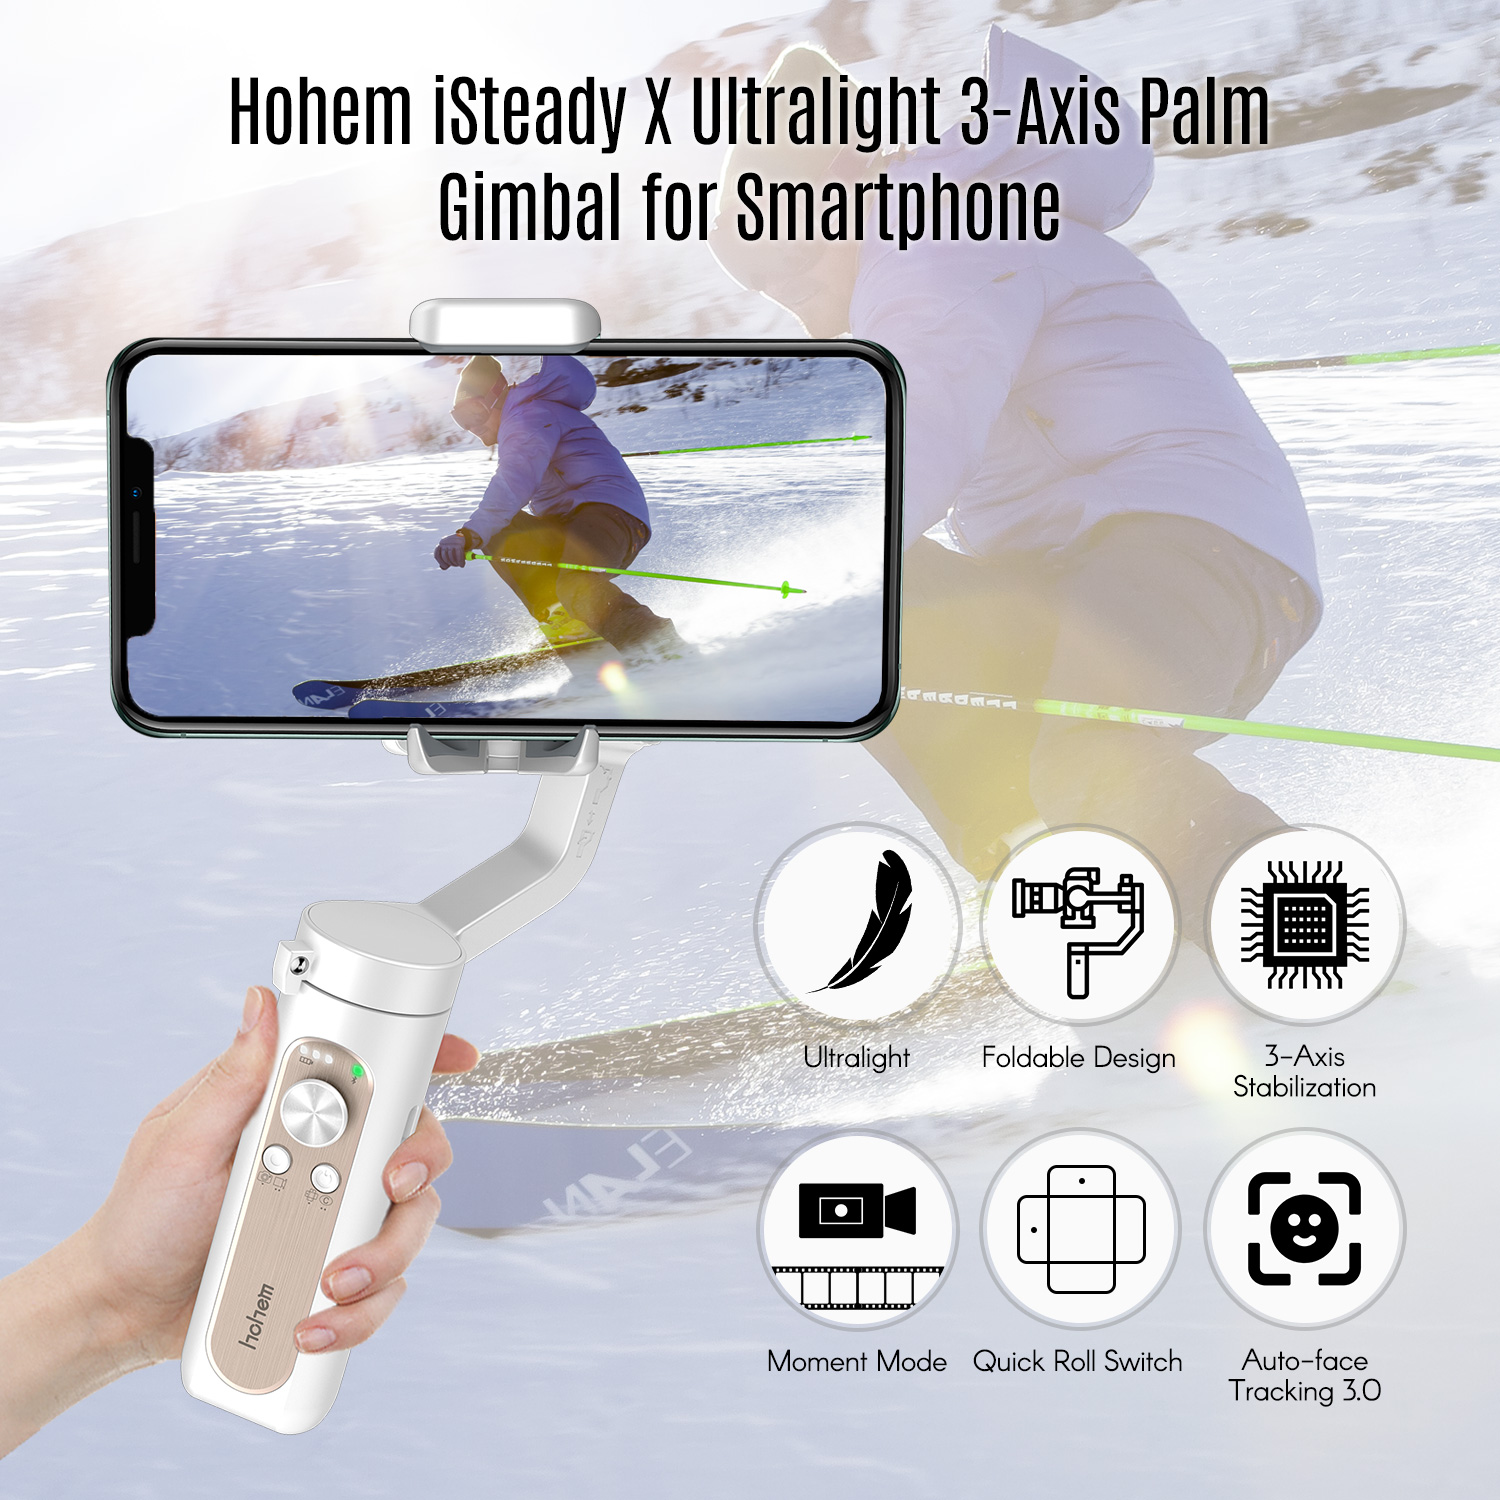 Hohem iSteady X Ultralight 3-Axis Palm Gimbal Handheld Stabilizer Foldable Design One-click Inception Mode for Smartphone